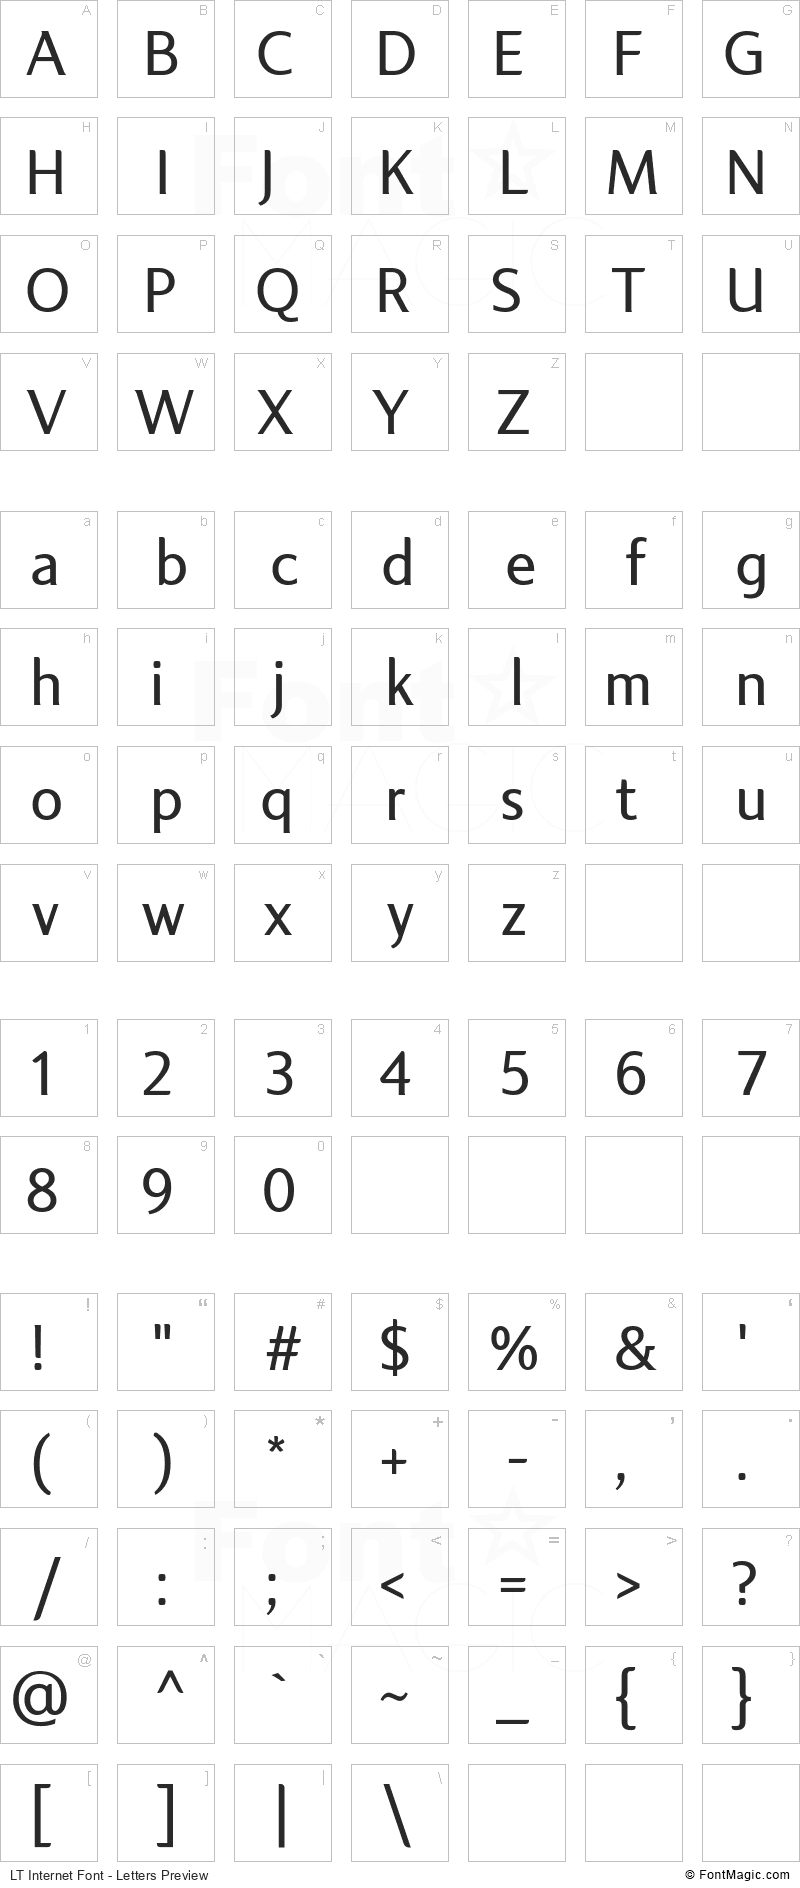 LT Internet Font - All Latters Preview Chart